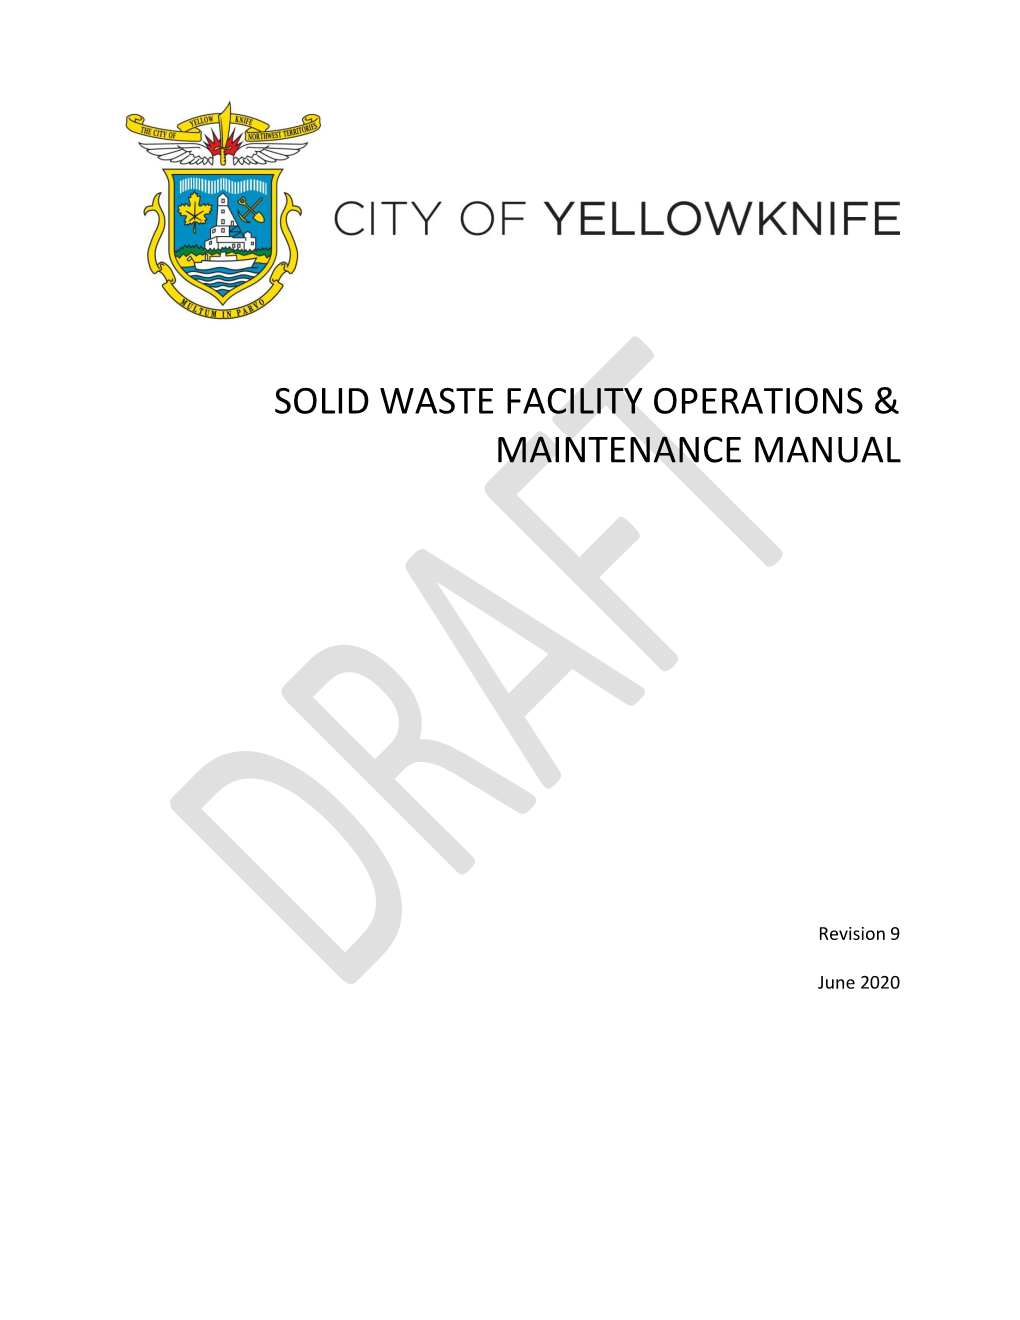 Solid Waste Facility Operations & Maintenance Manual